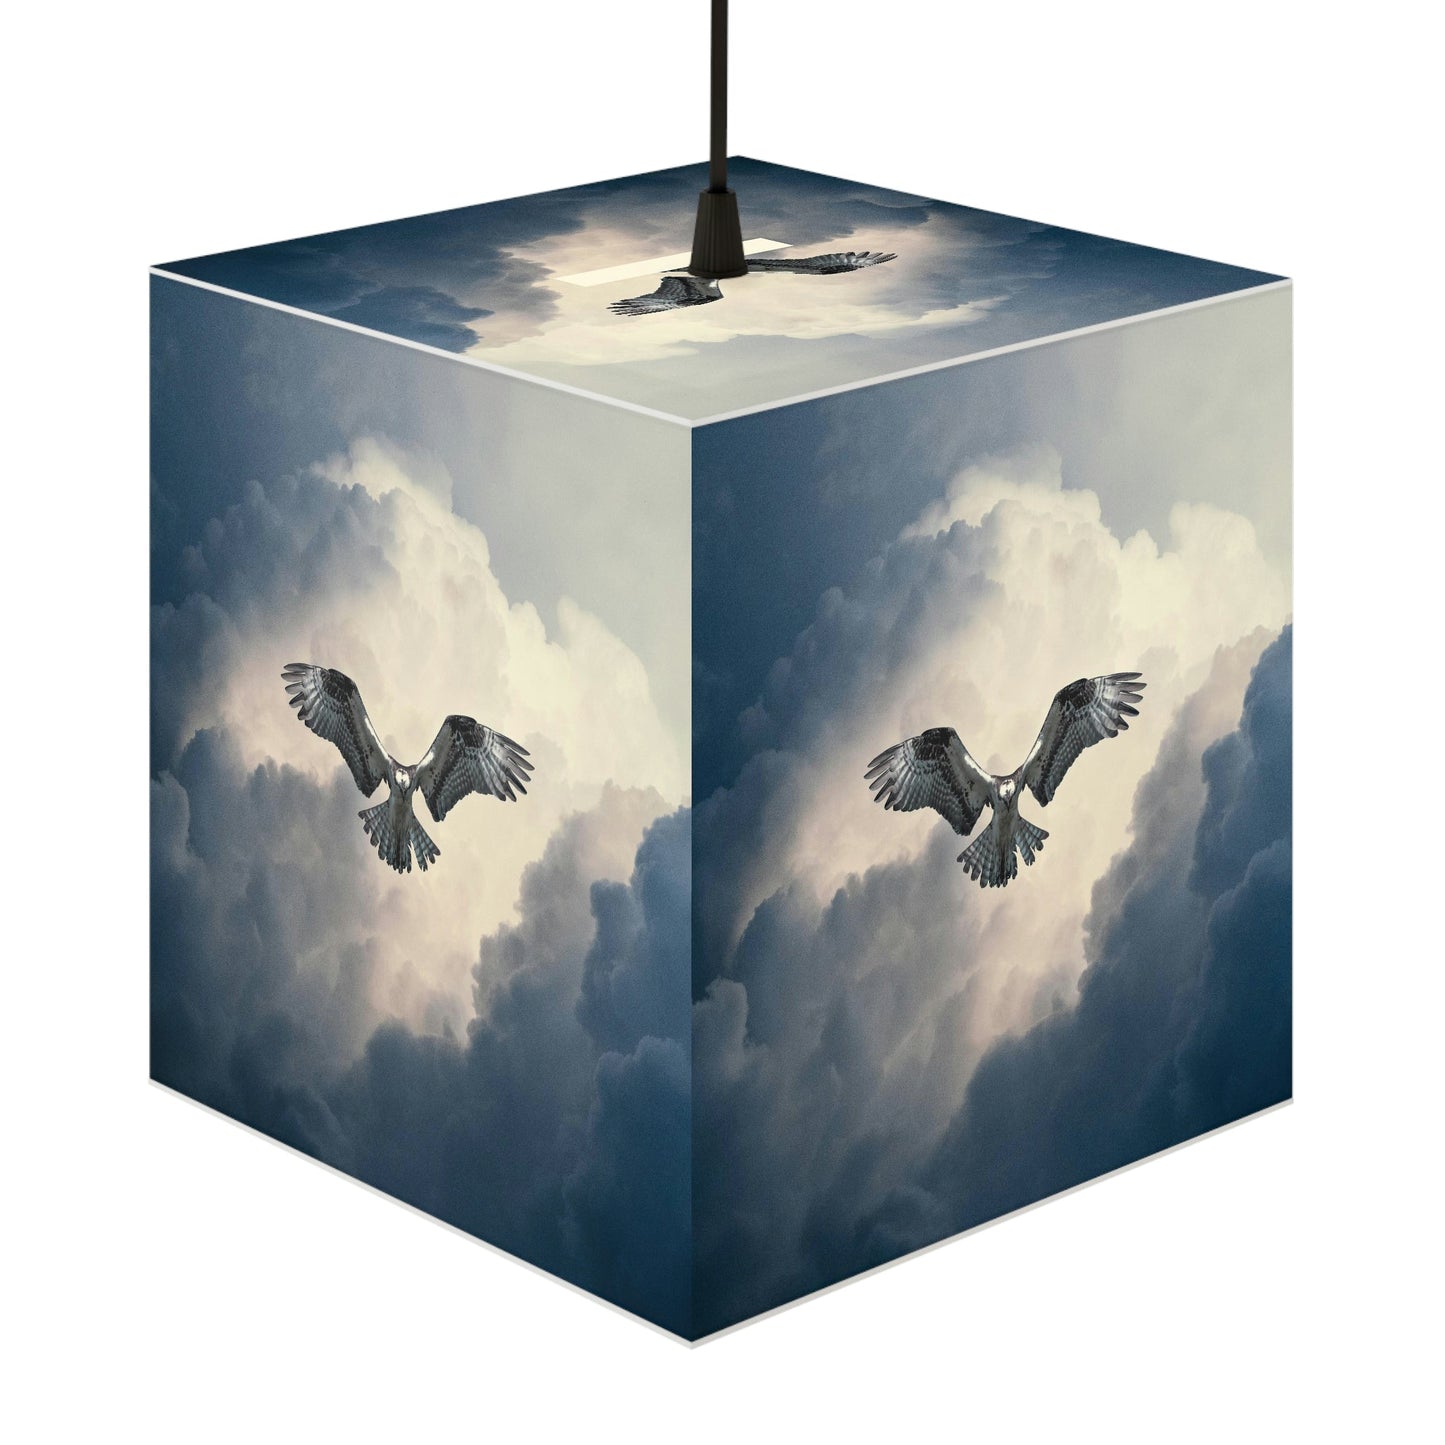 Osprey Light Cube Lamp - Perfect for the birdwatcher in your family